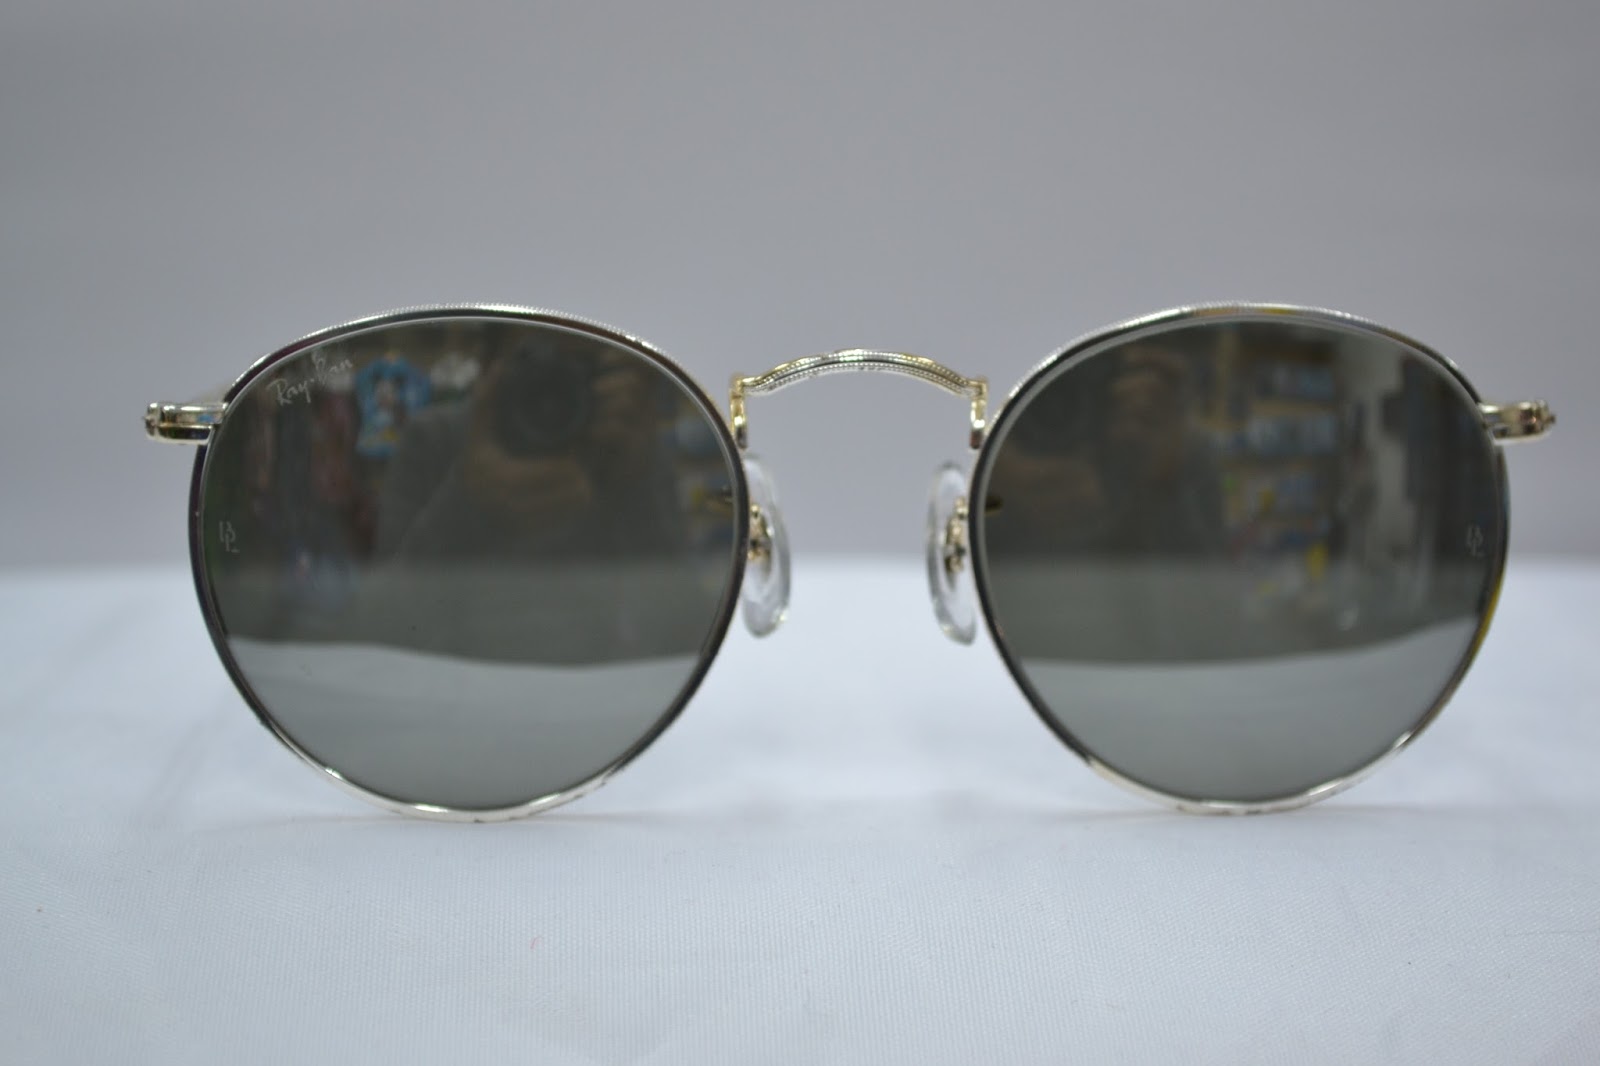 Vintage sunglass: Vintage Ray Ban Round lennon style, silver frame ...